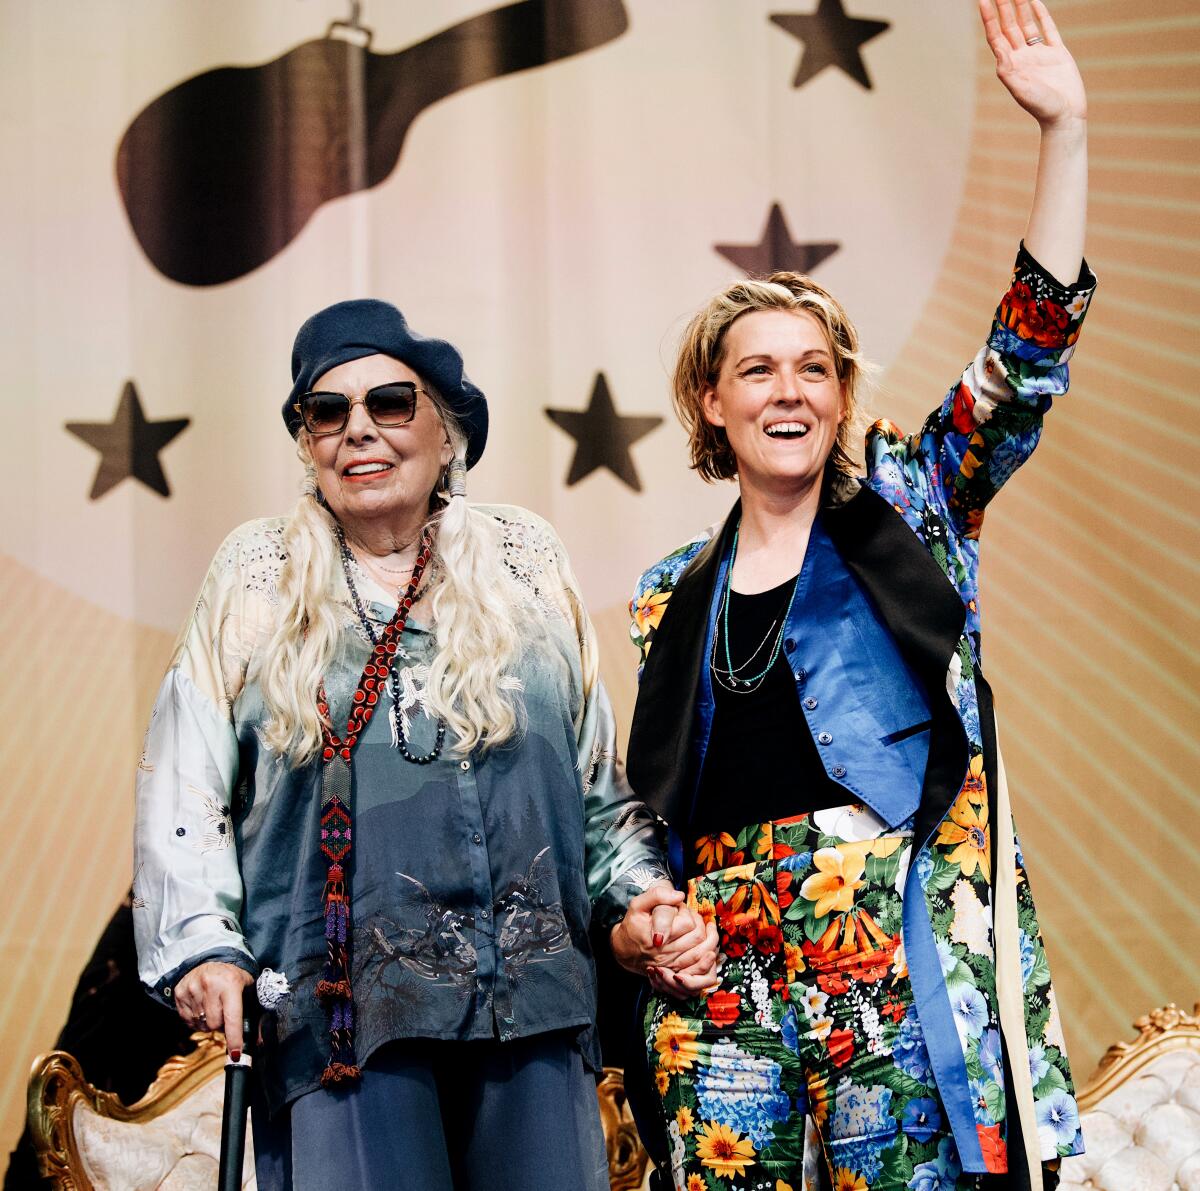 Two women holding hands and smiling onstage together